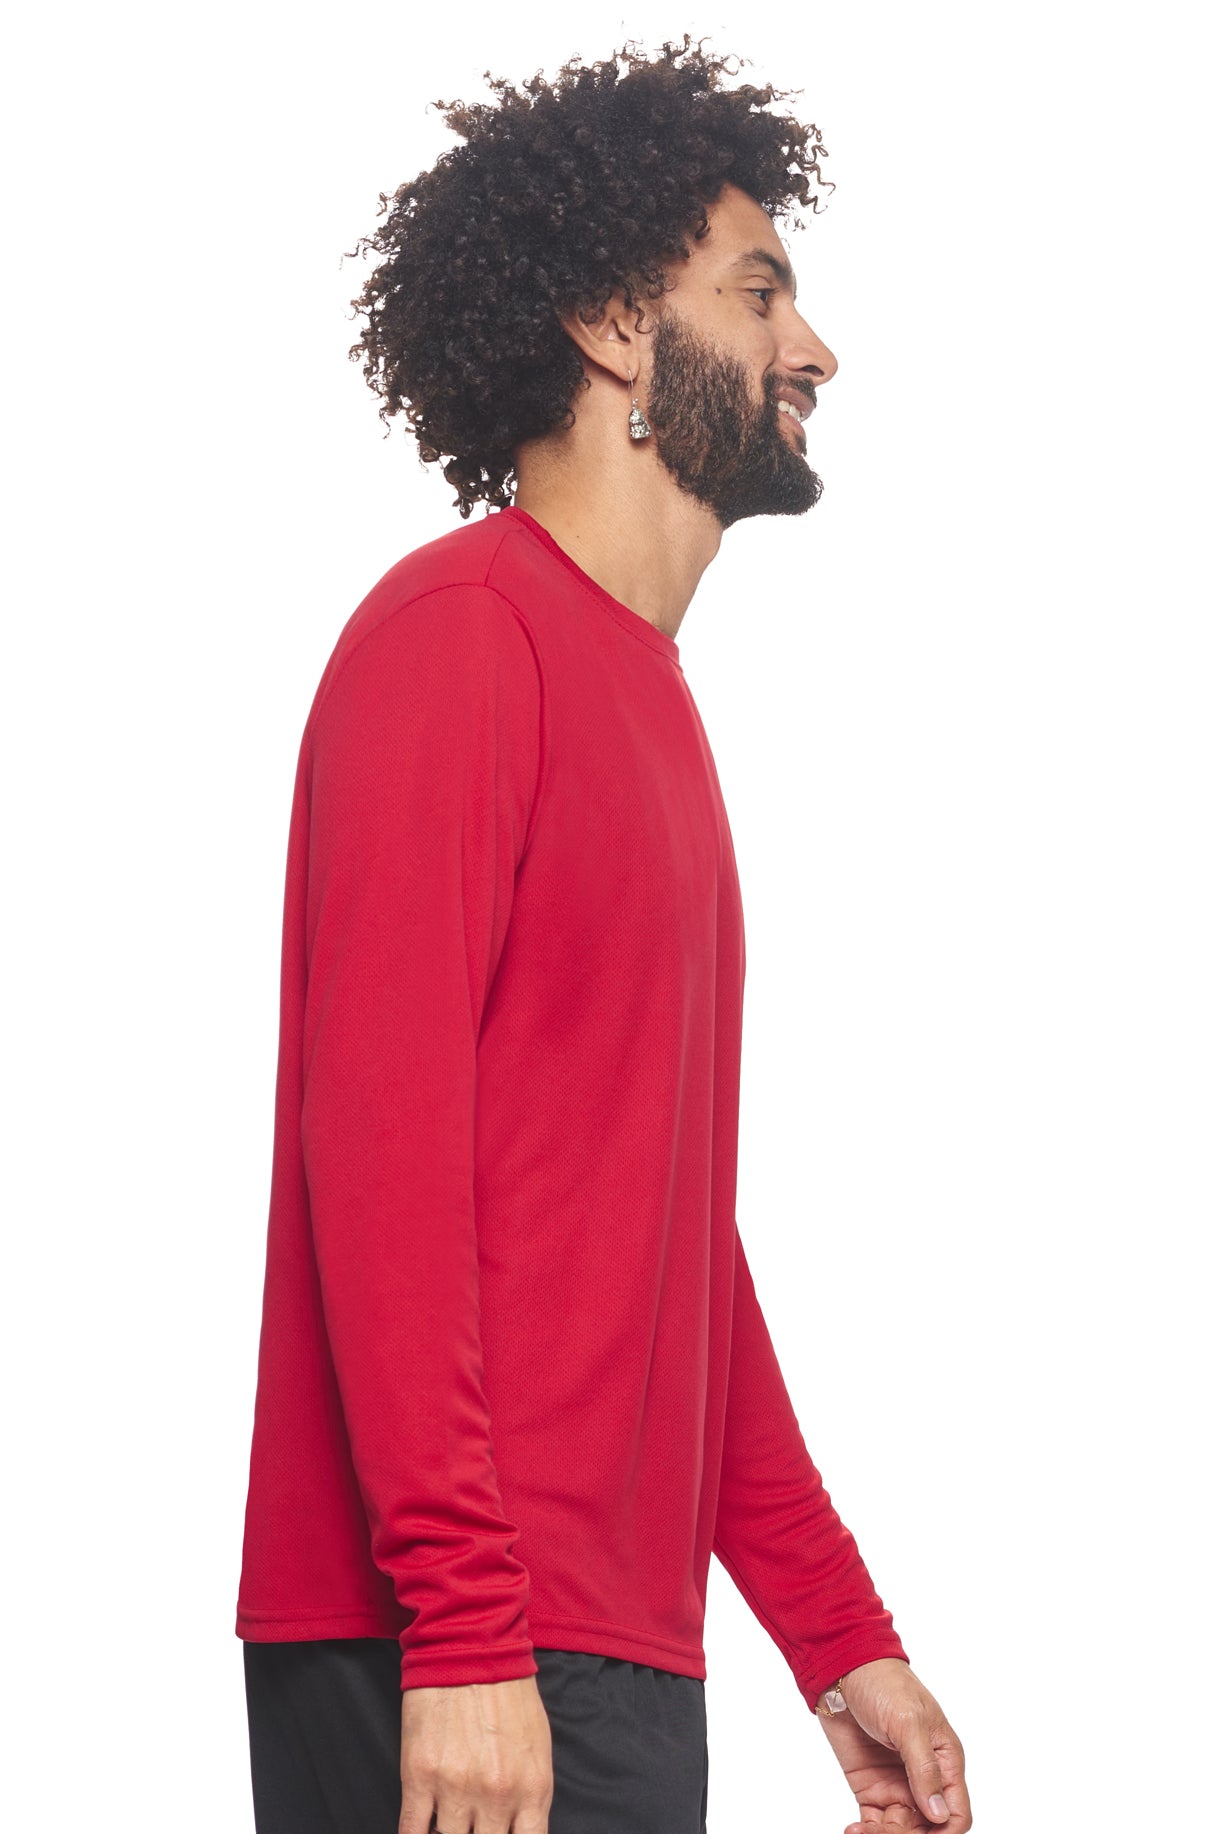 Expert Brand Wholesale Men's Oxymesh Performance Long Sleeve Tec Tee Imported AJ901 Red Image 2#true-red